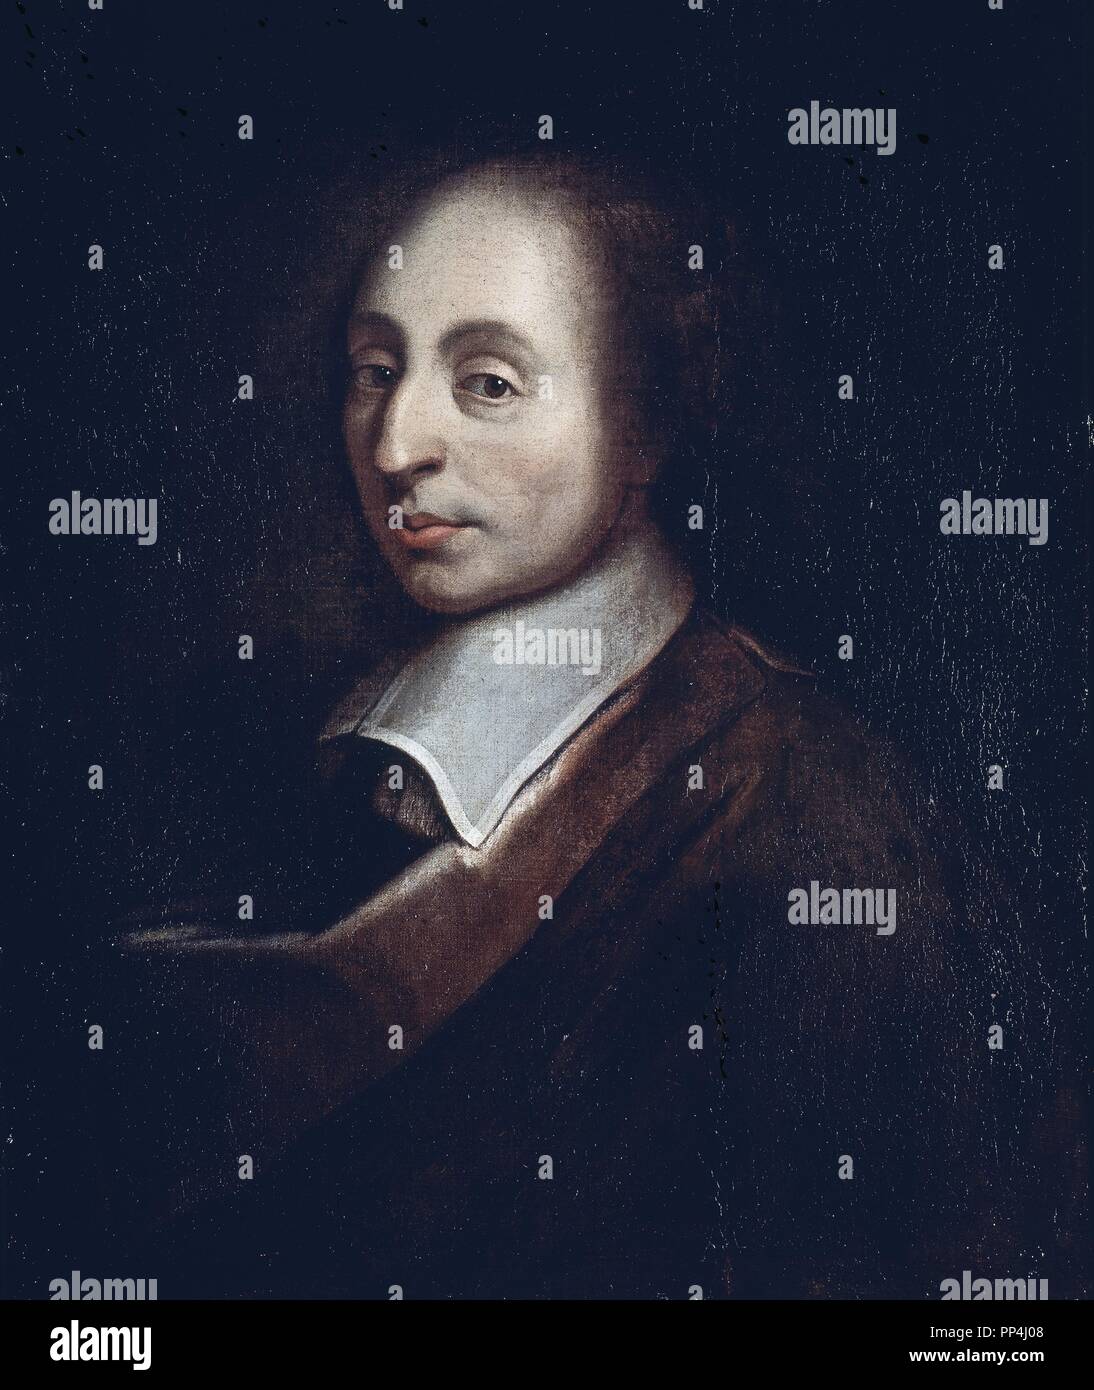 BLAISE PASCAL - 1623-1662 - PHILOSOPHER, MATHEMATICAL AND PHYSICIST. (ANONYMOUS, FRENCH 17th CENTURY). Author: ANONIMO FRANCES. Location: MUSEO PALACIO. Versailles. France. Stock Photo